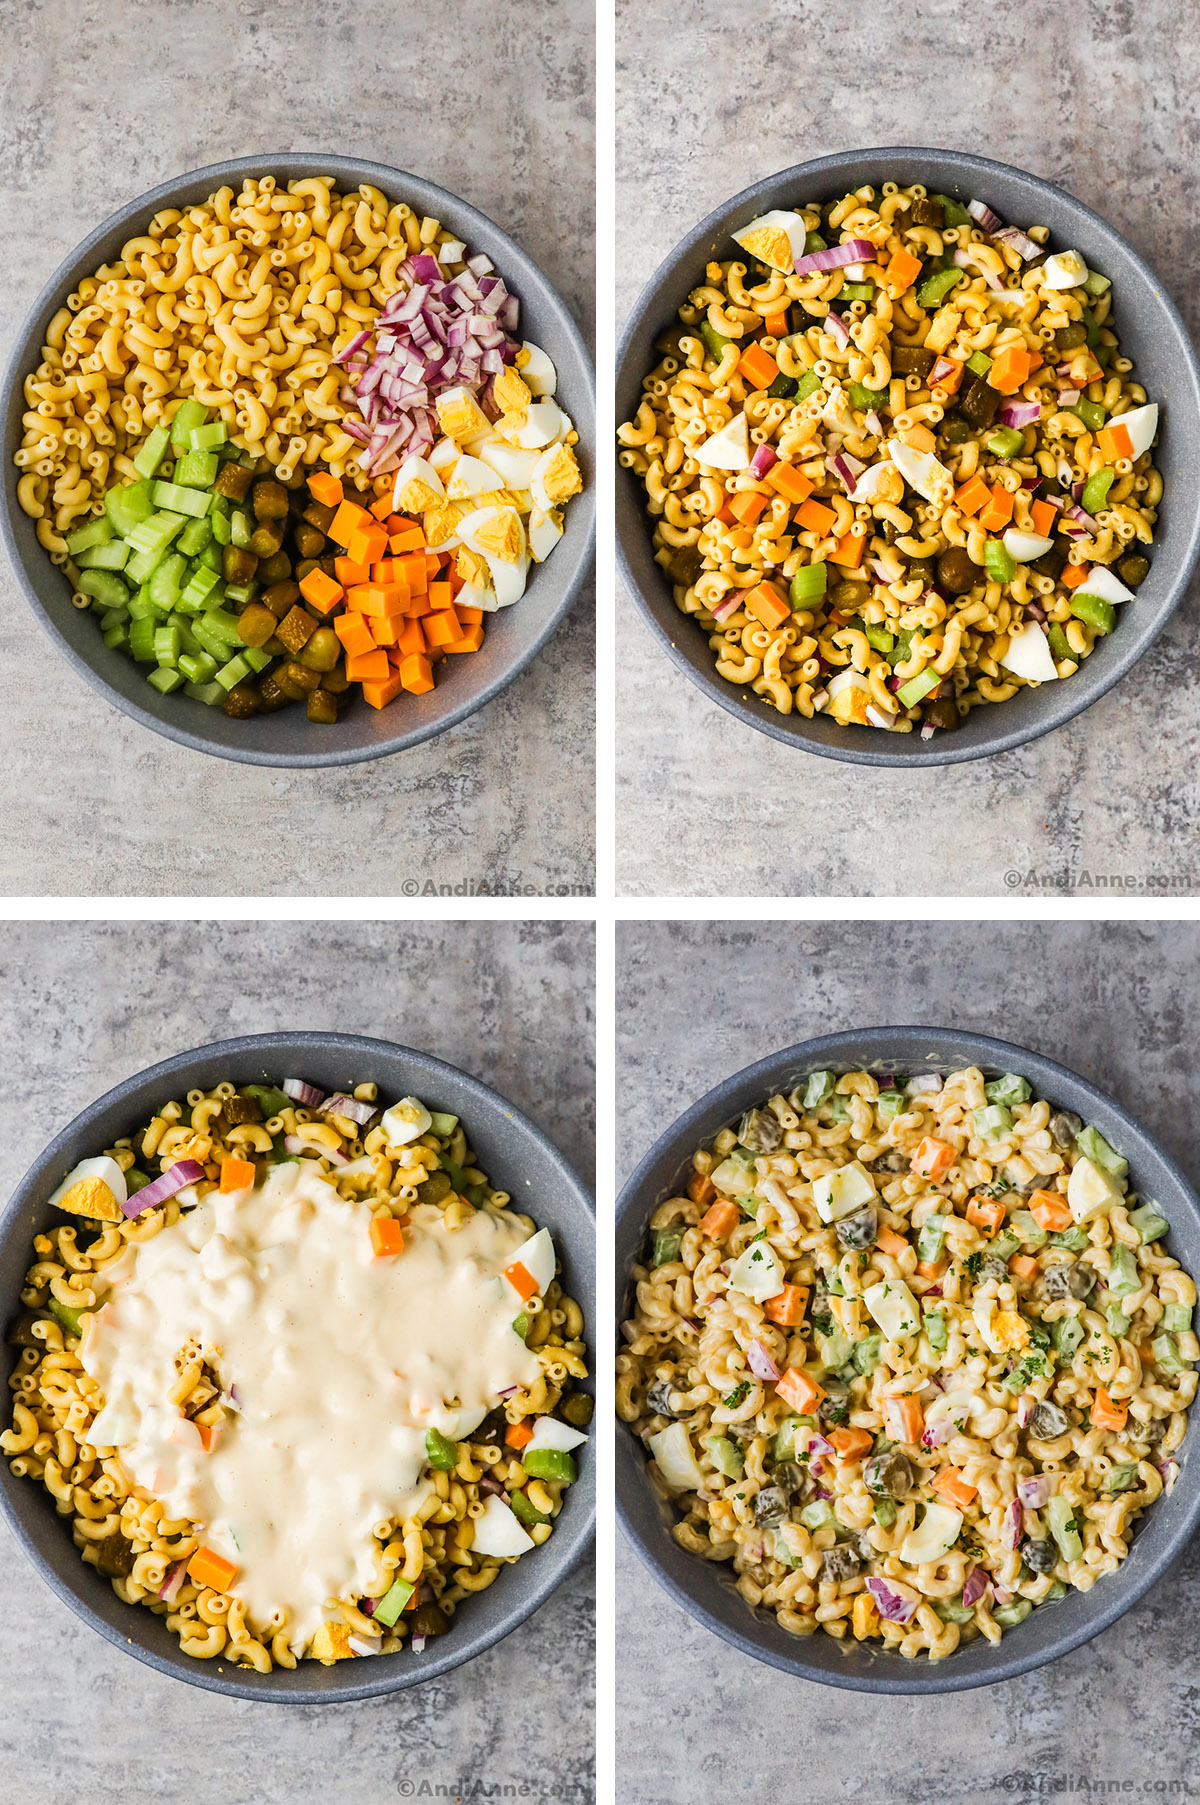 Four images together. First is macaroni, celery, pickles, onion, eggs and cheese in separate secitons. Second is ingredients mixed together. Third has creamy sauce poured on top. Fourth is salad mixed together.